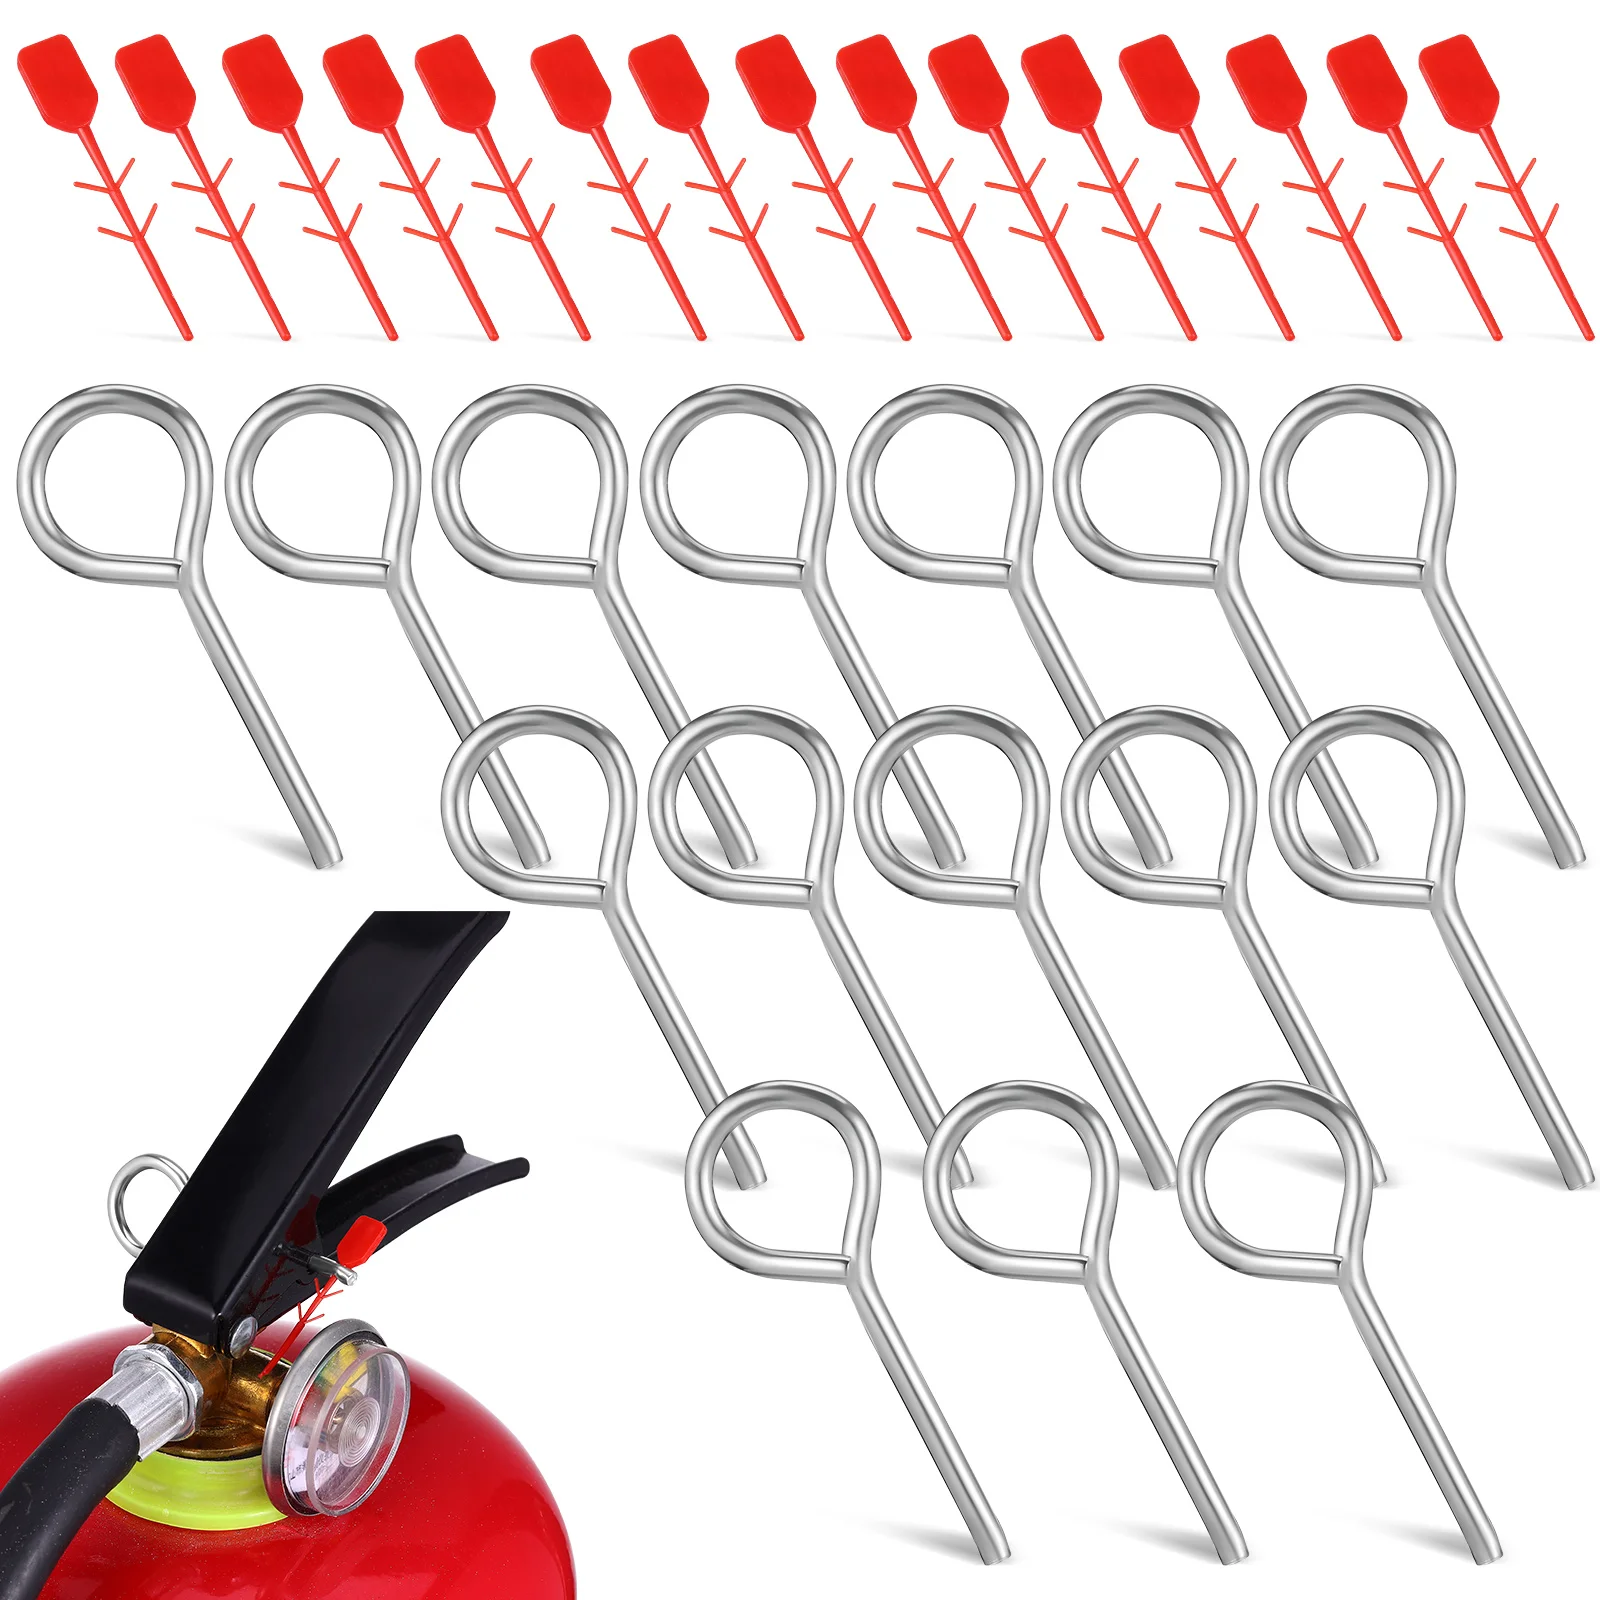 15 Sets Fire Extinguisher Pins Replacement Lock Pins Metal Pull Pins Fire Extinguisher Attachment